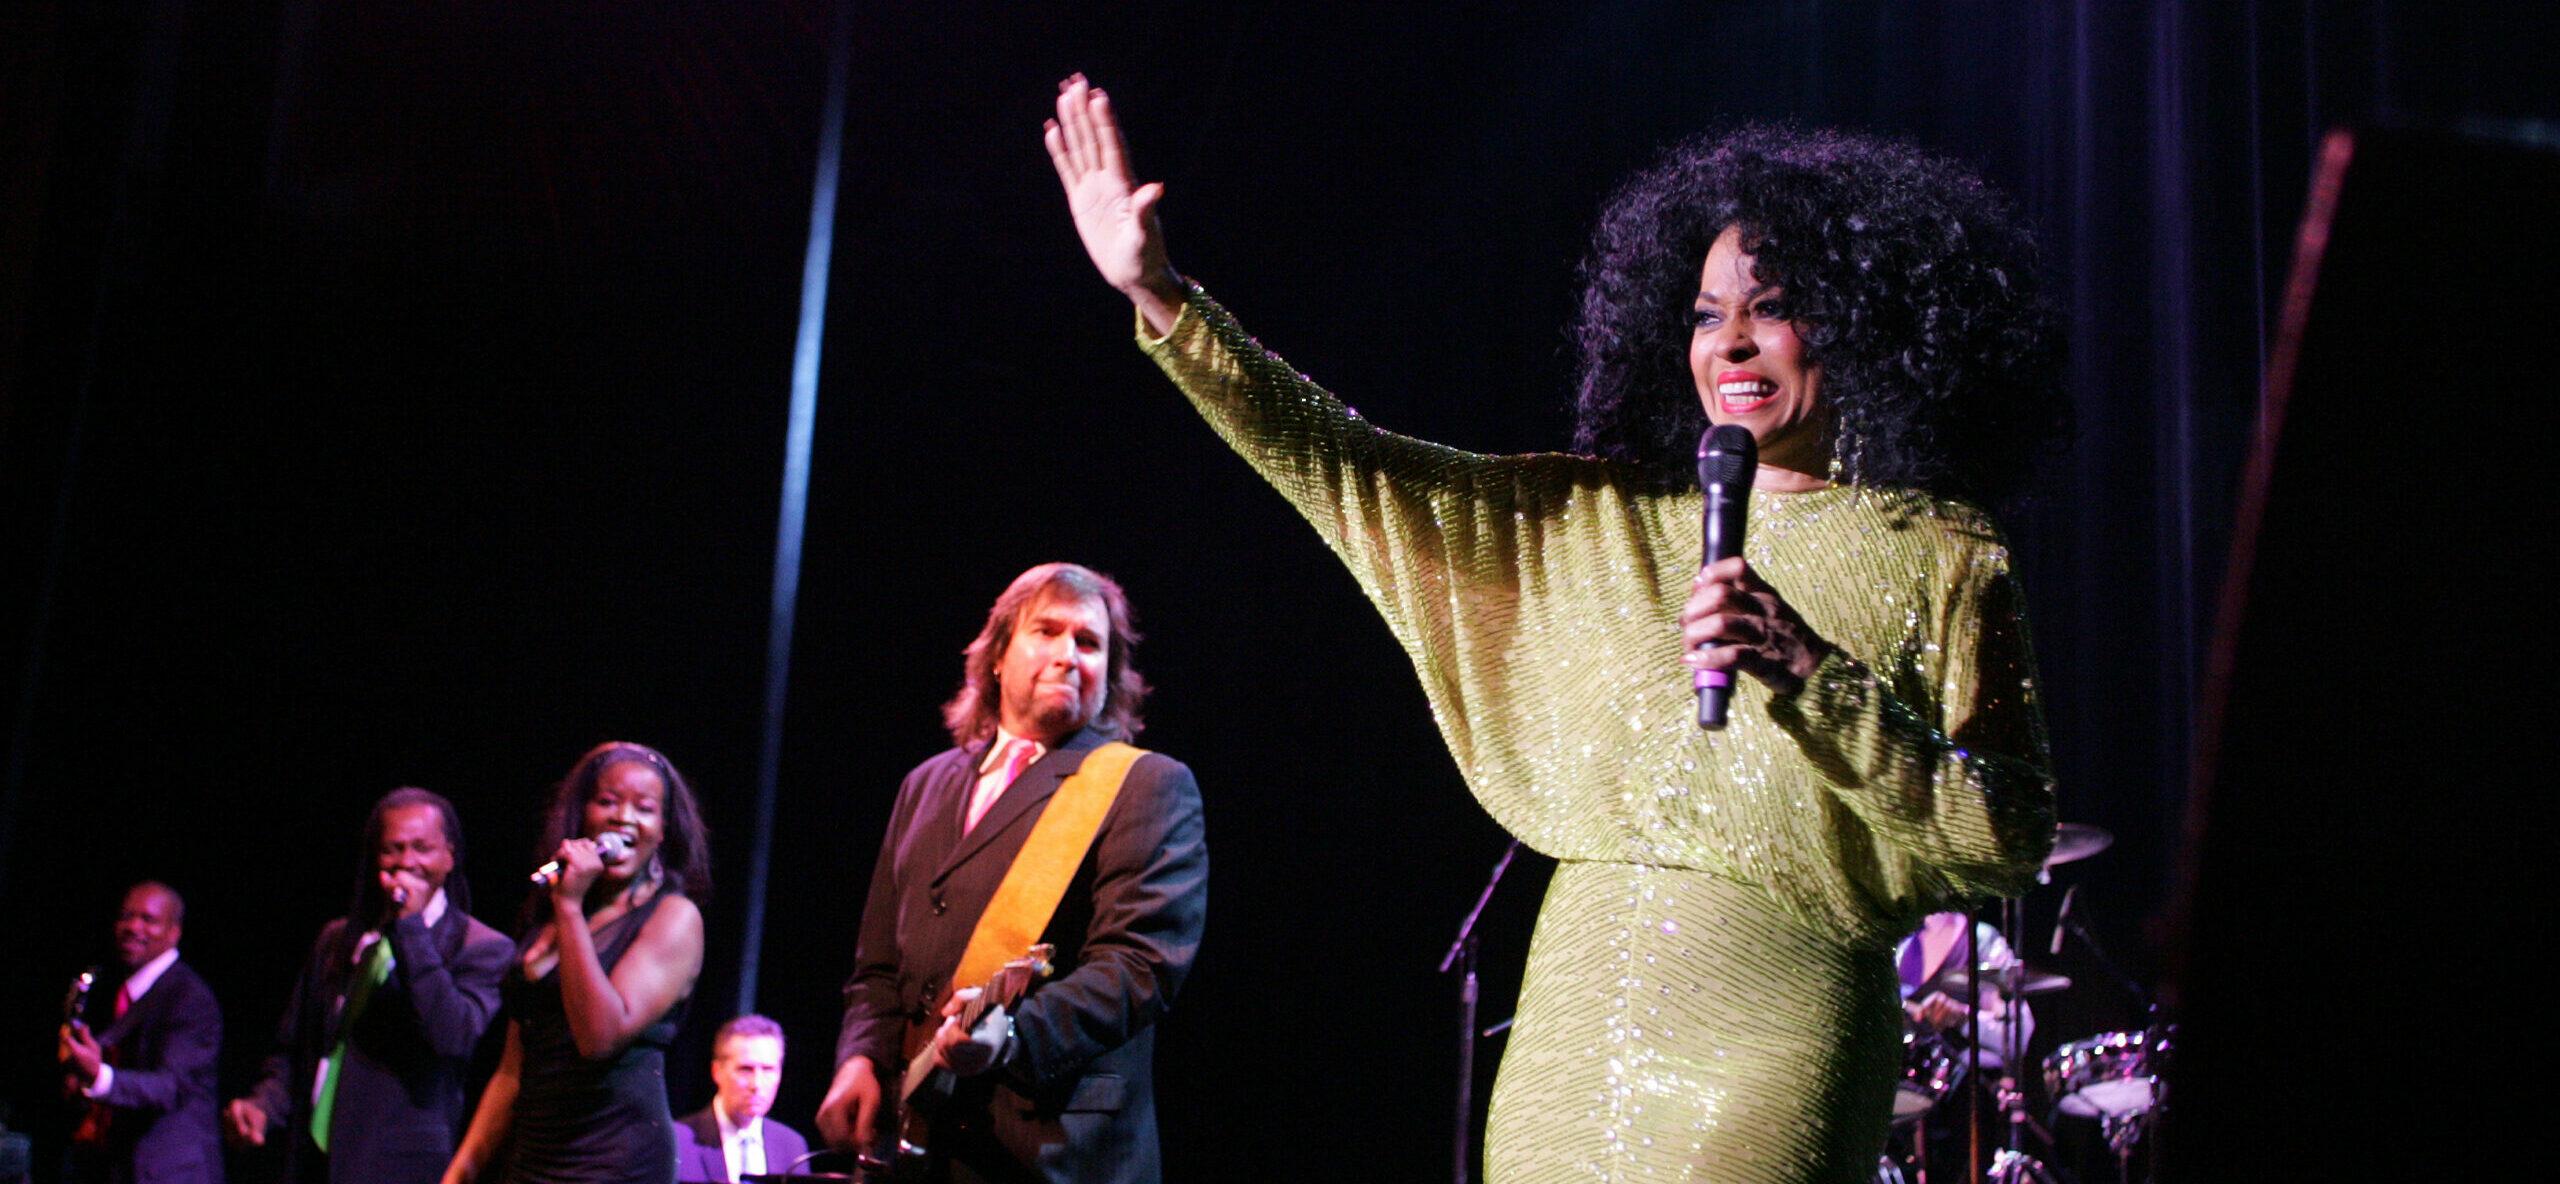 Diana Ross performing at the Segerstrom Center for the Arts